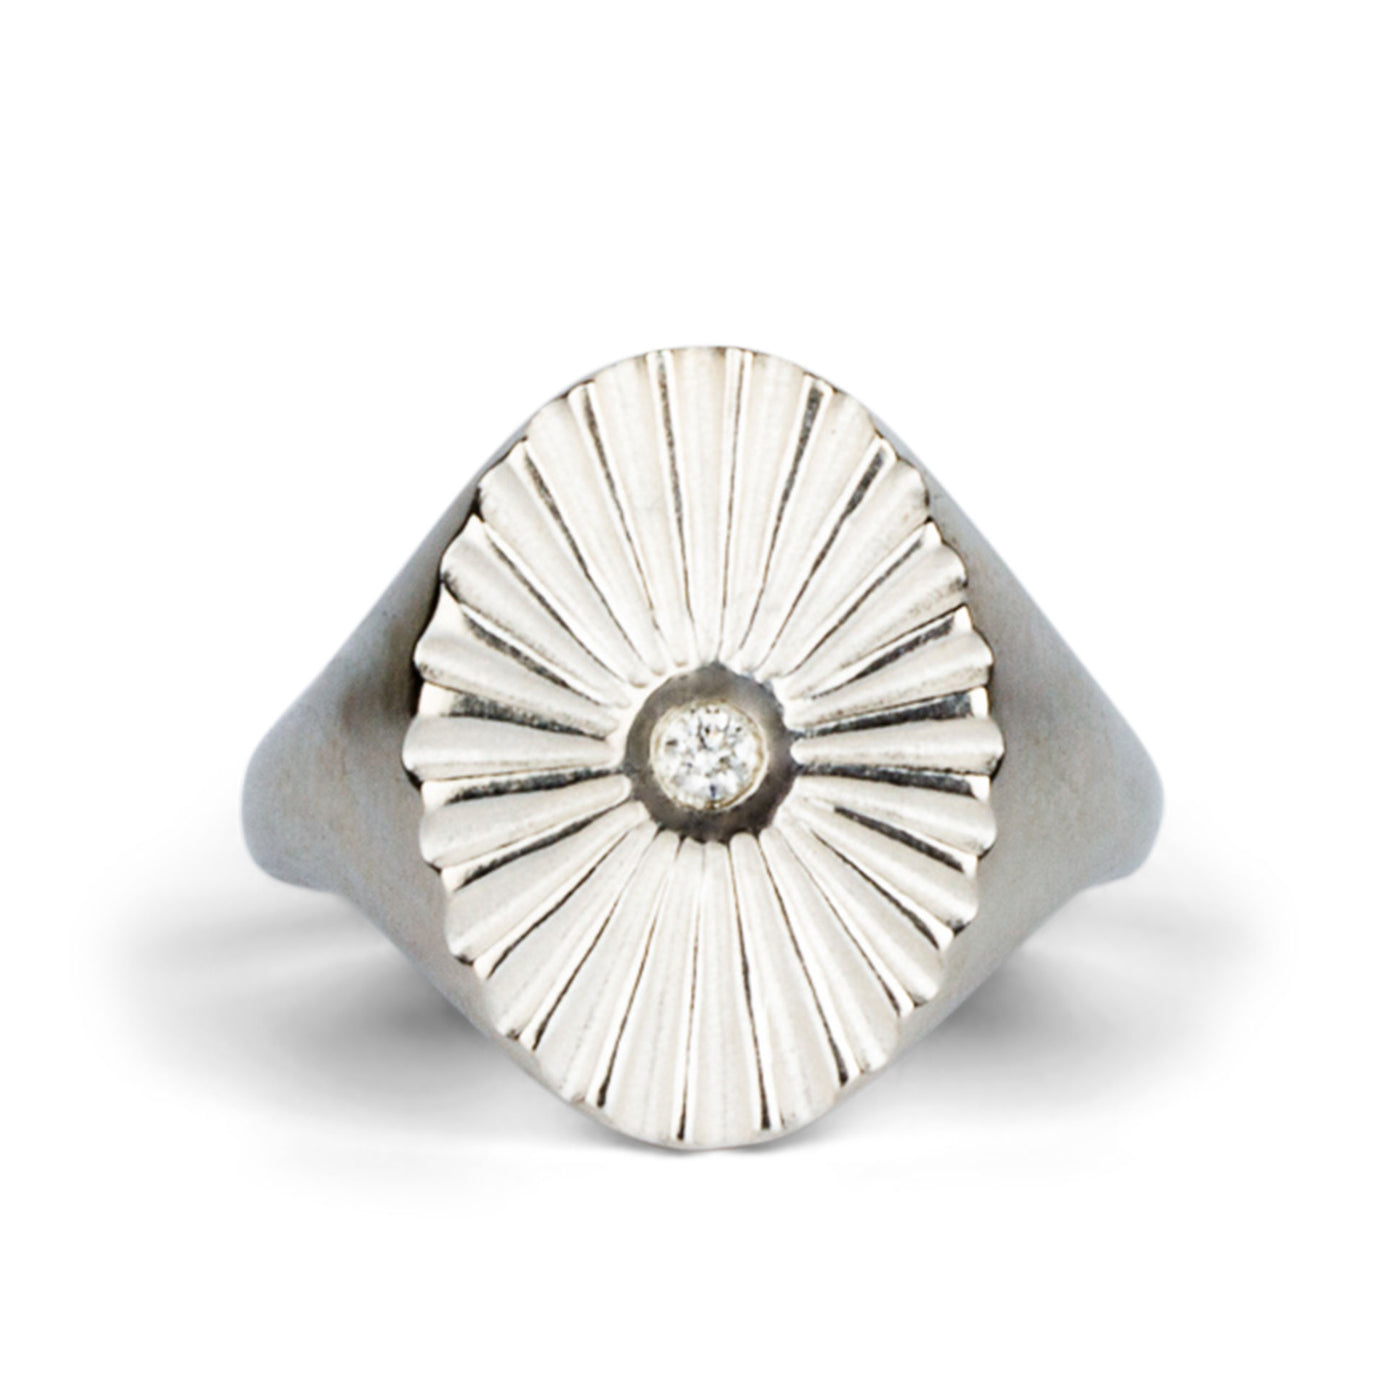 Large silver oval signet ring with a carved sunburst pattern and diamond center on a white background